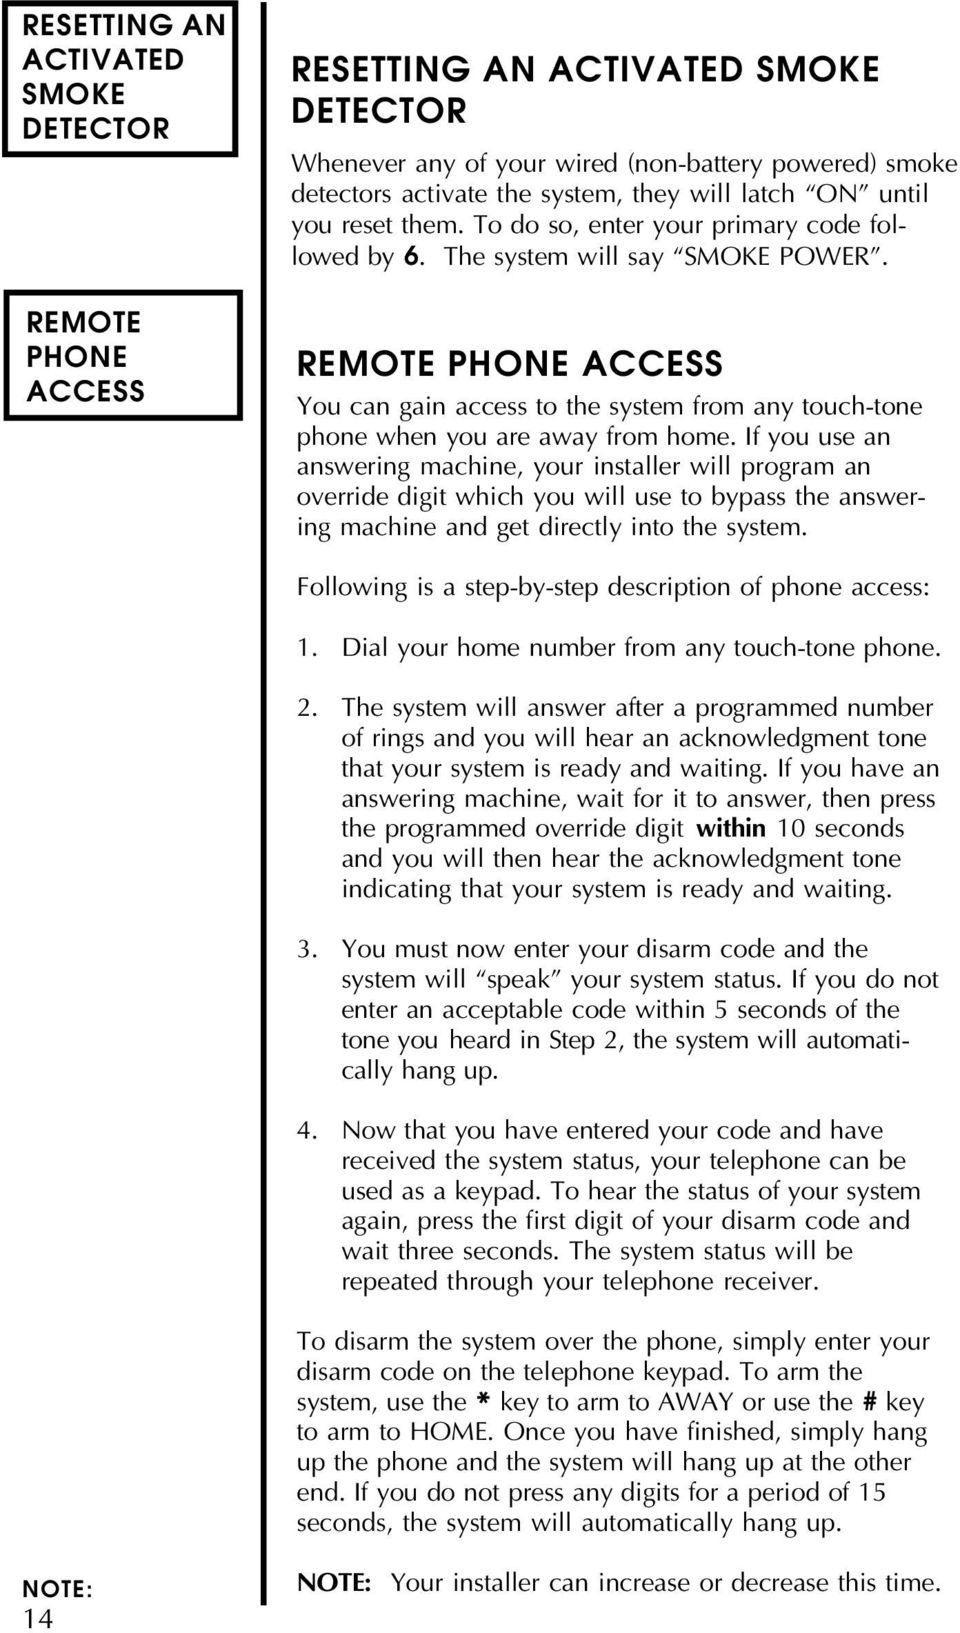 REMOTE PHONE ACCESS You can gain access to the system from any touch-tone phone when you are away from home.